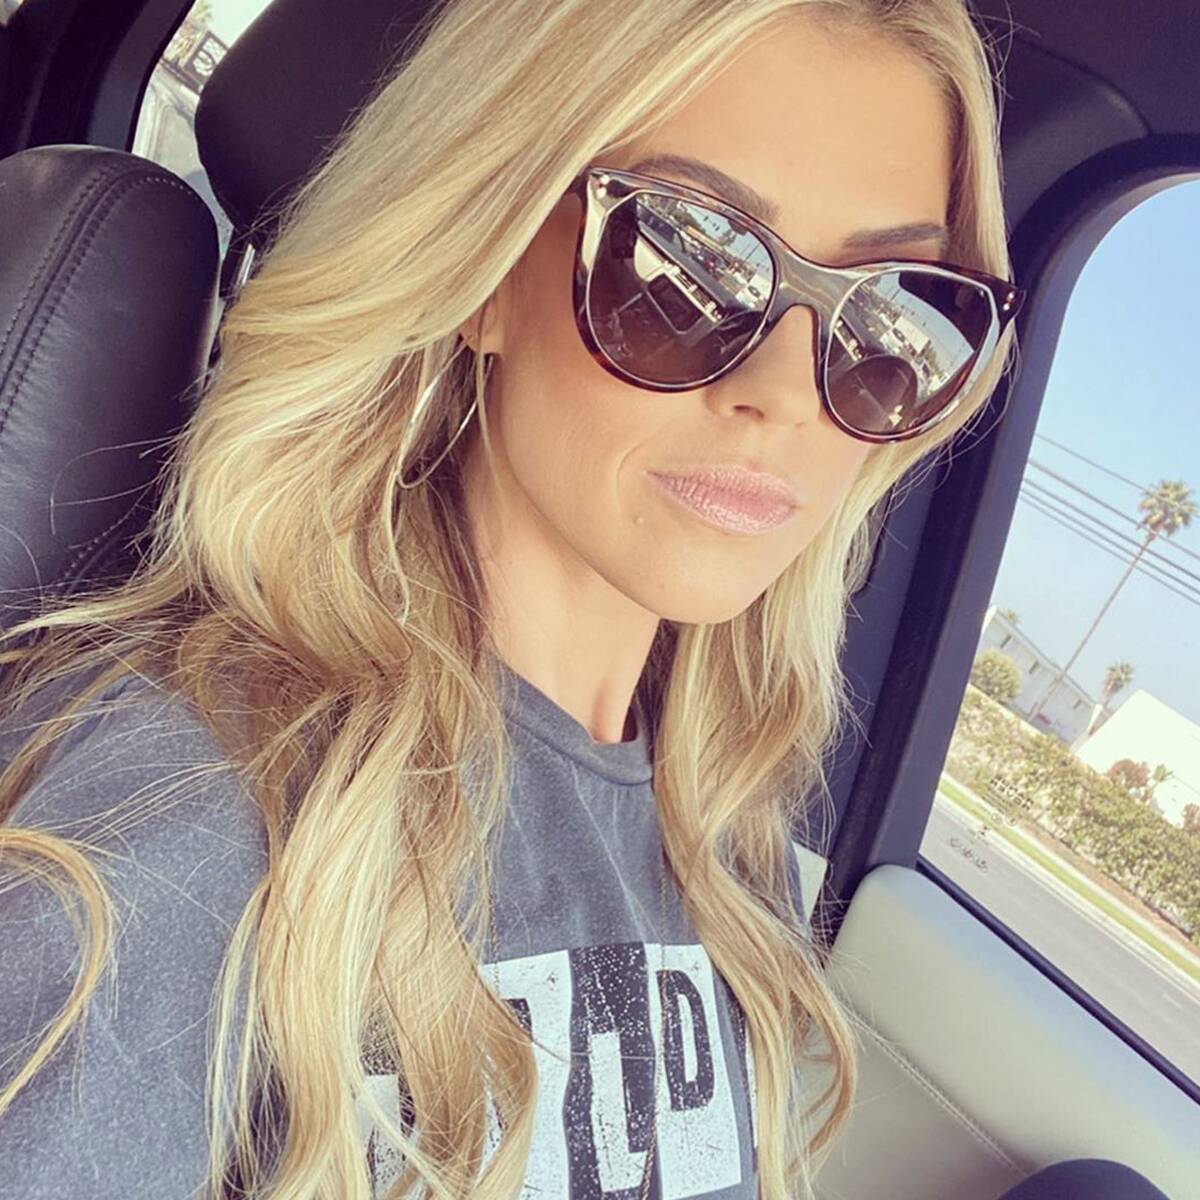 Christina Anstead Responds to Fans’ Concern That She Looks “Really Skinny" and "Needs to Eat”